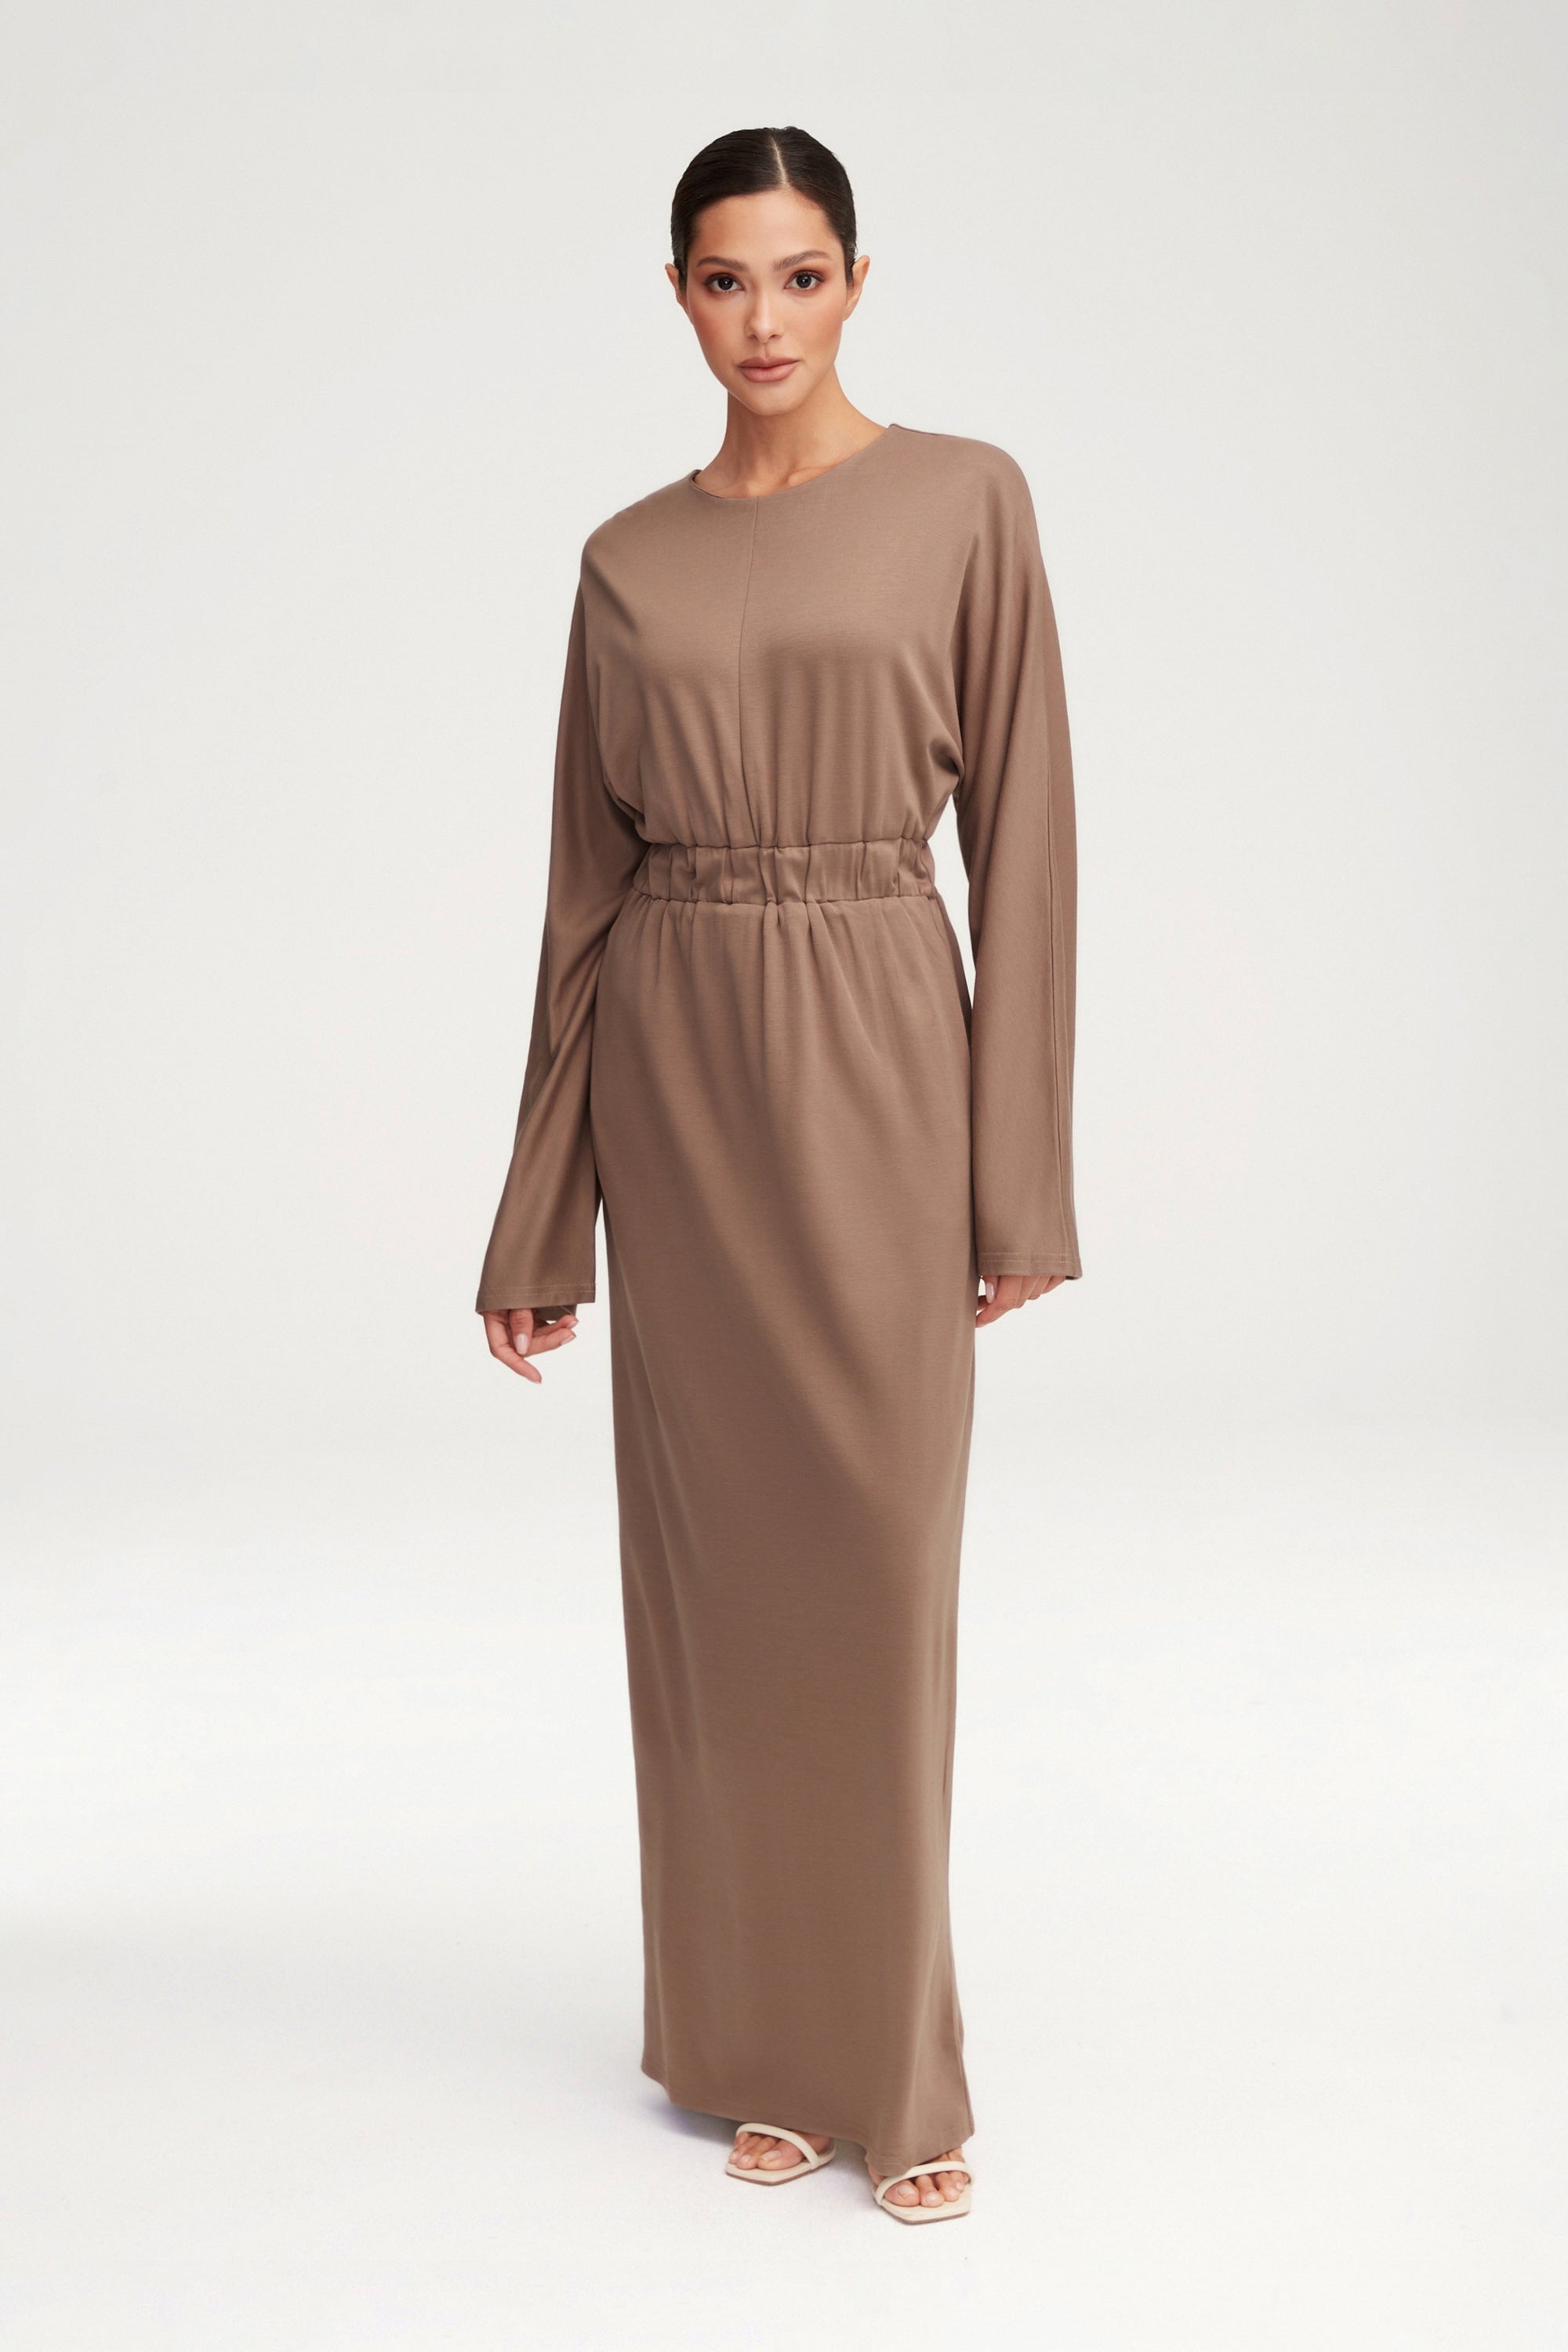 Adelynn Jersey Batwing Maxi Dress - Taupe Clothing Veiled 